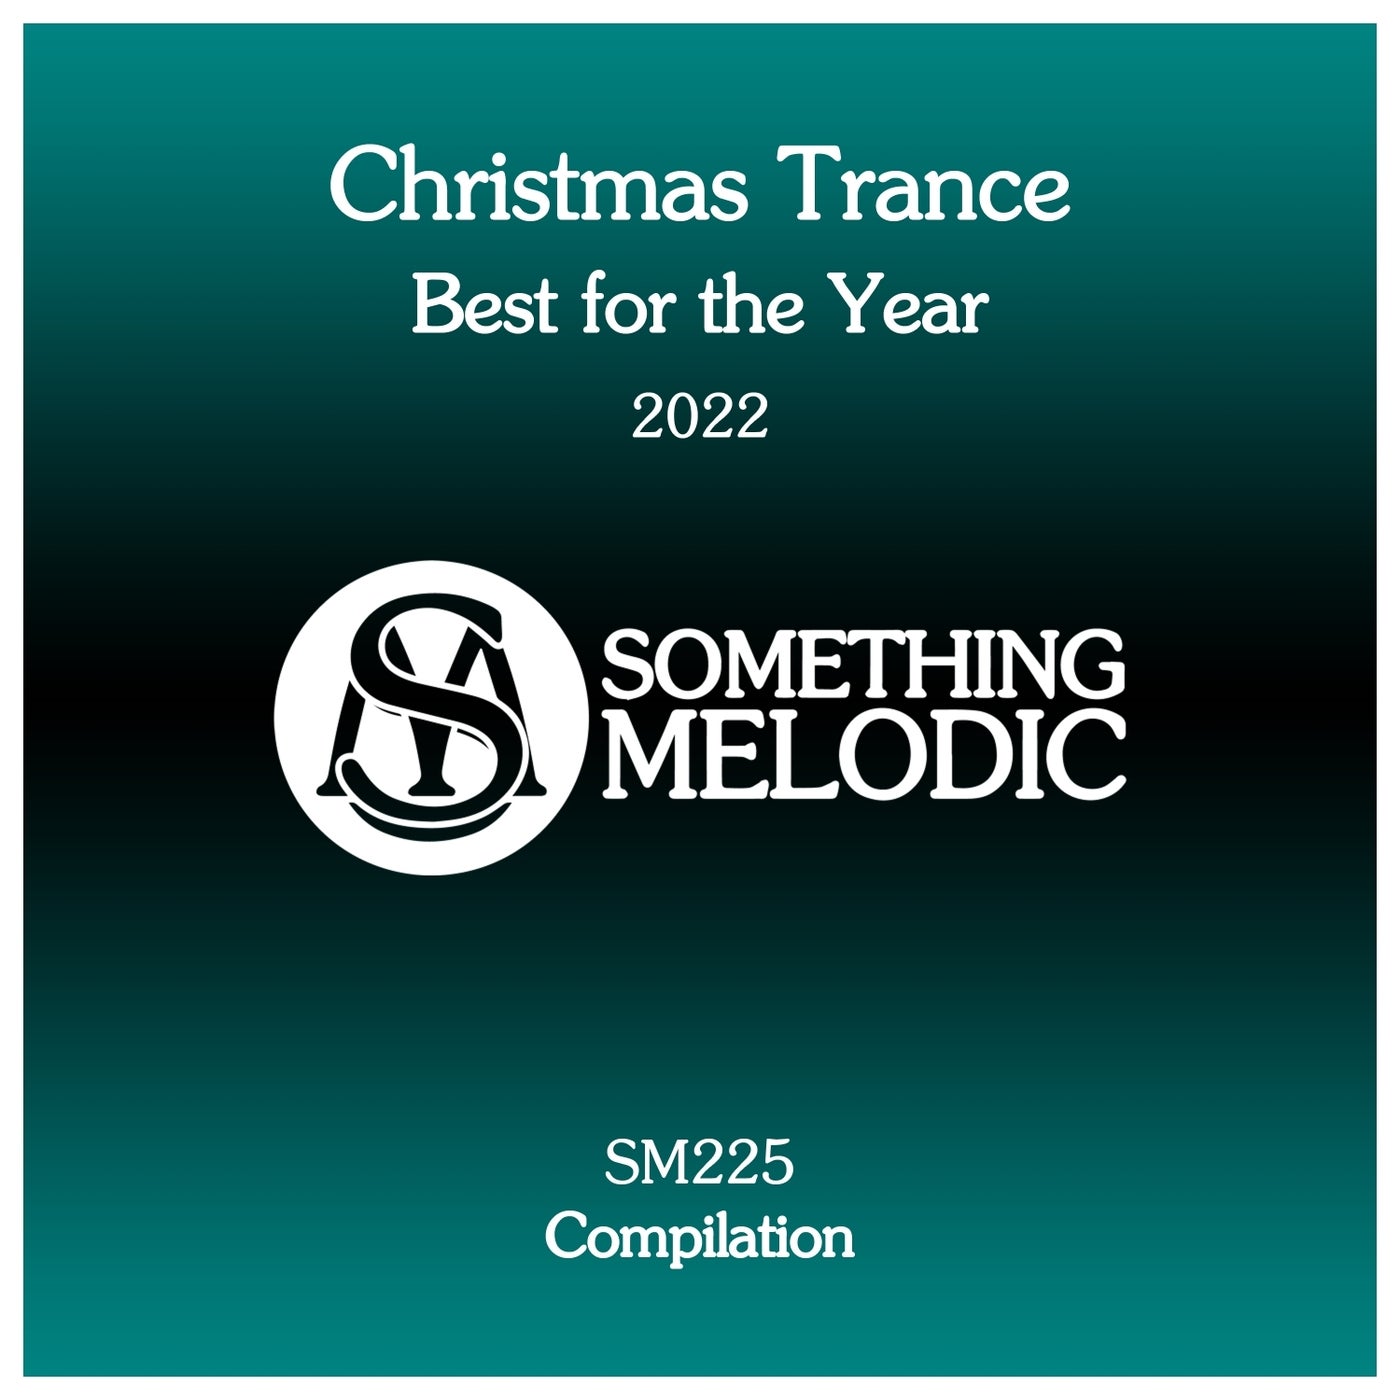 Christmas Trance: Best for the Year 2022